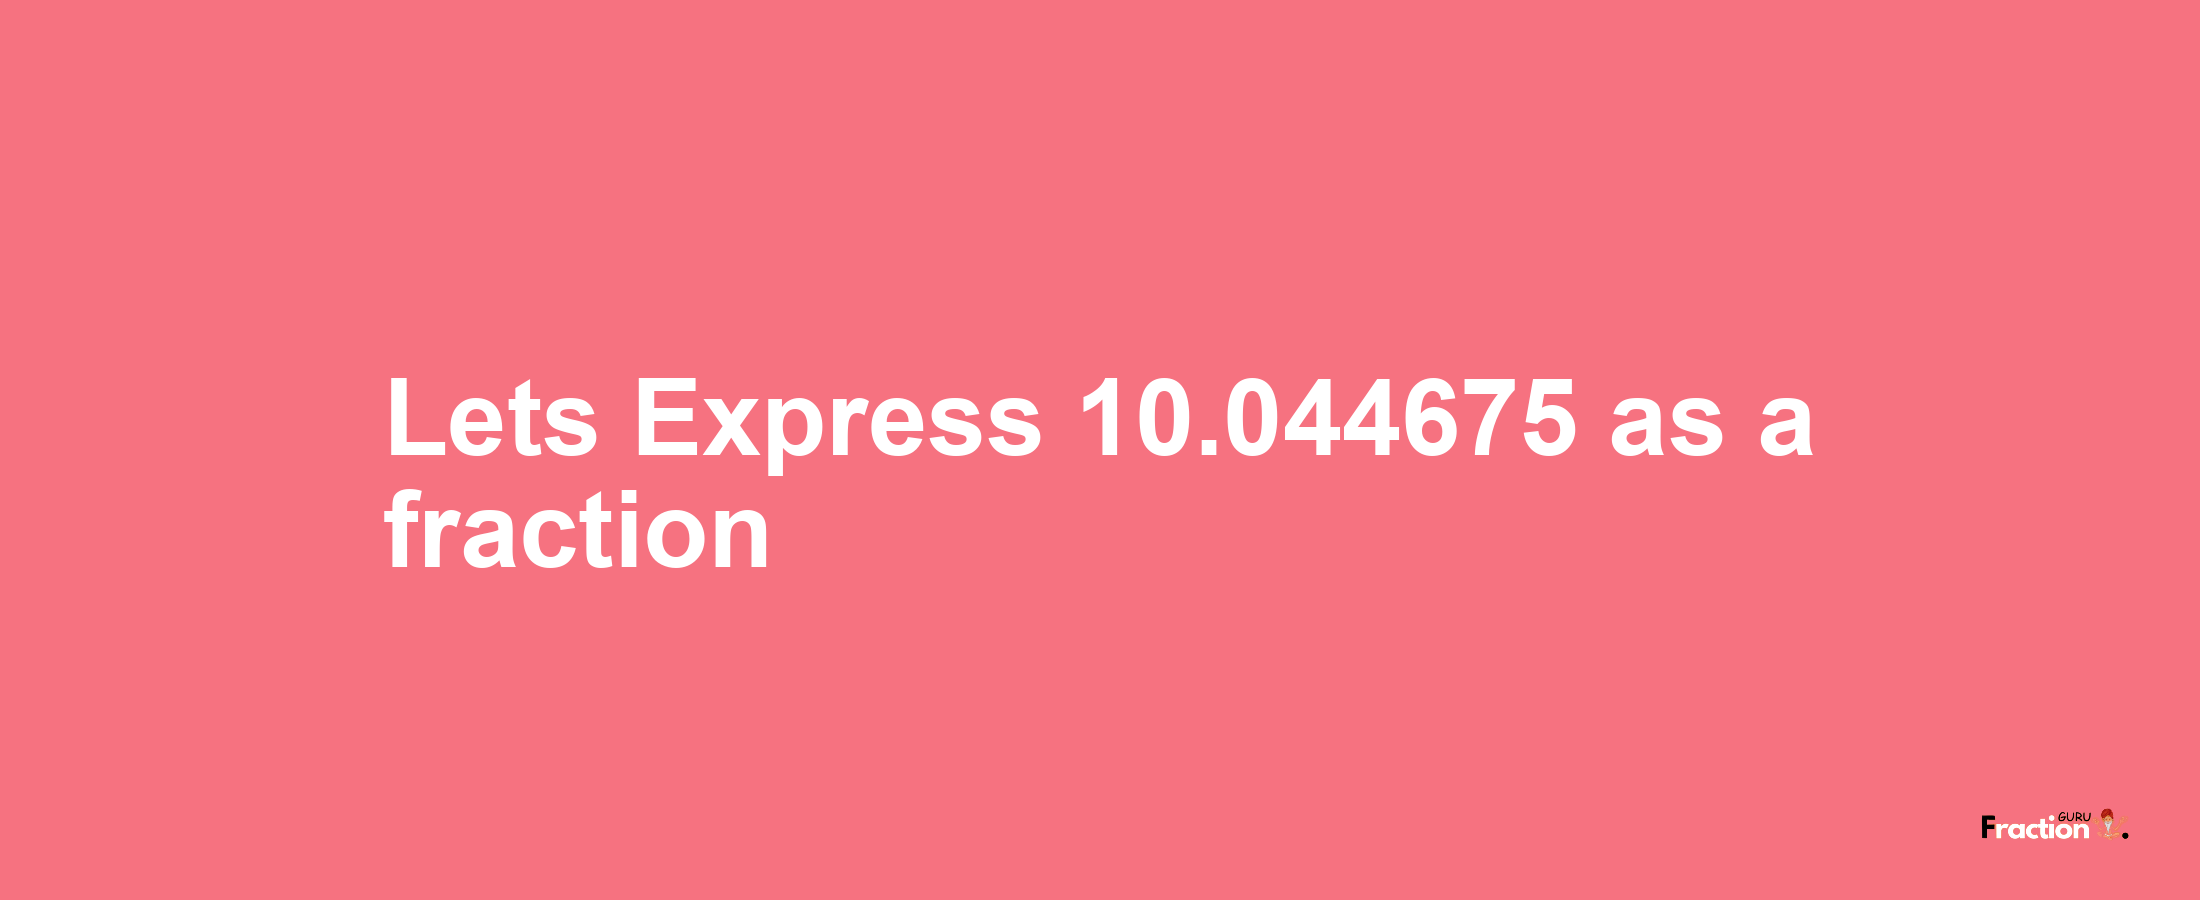 Lets Express 10.044675 as afraction